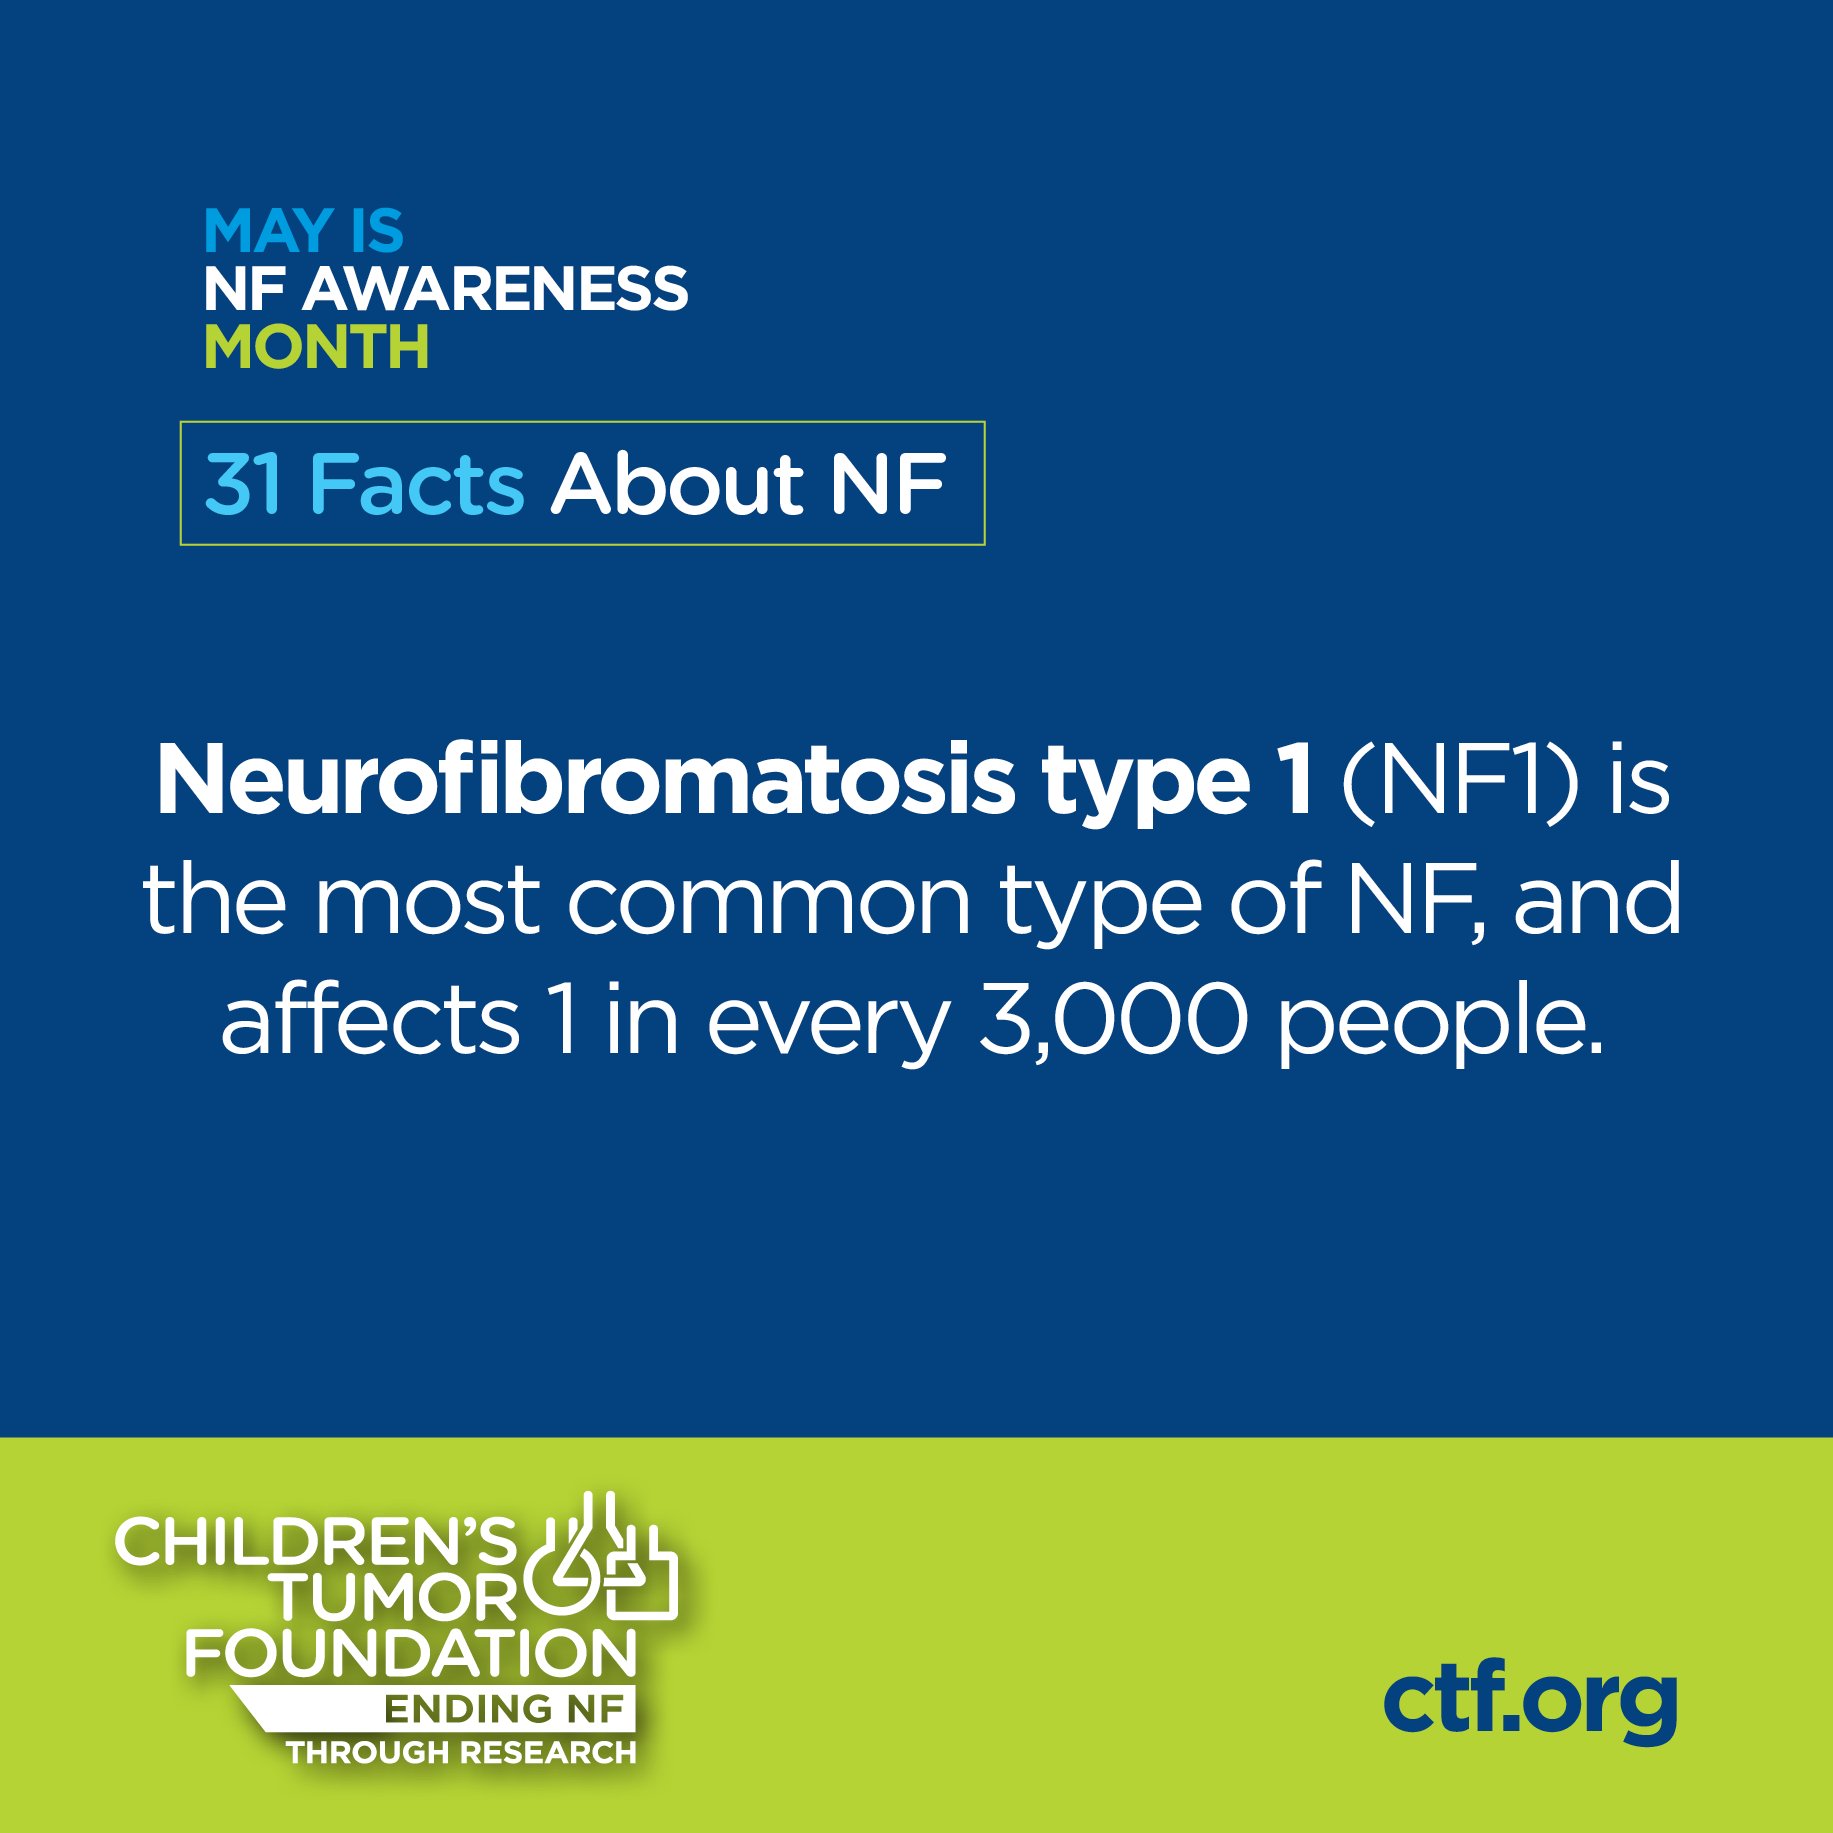 May is NF (Neurofibromatosis) Awareness Month